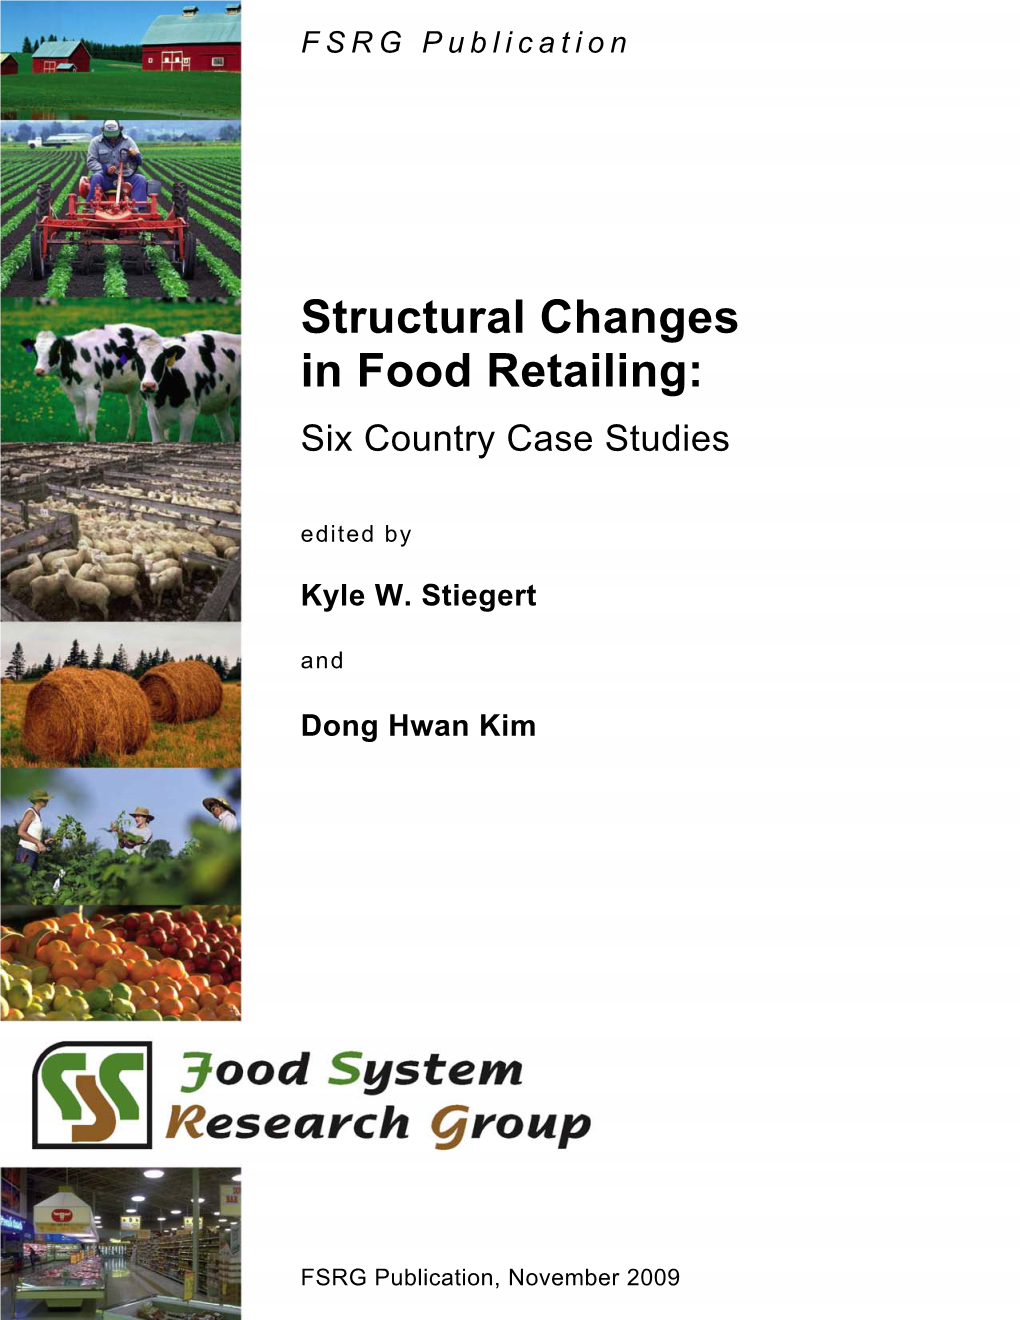 Structural Changes in Food Retailing: Six Country Case Studies